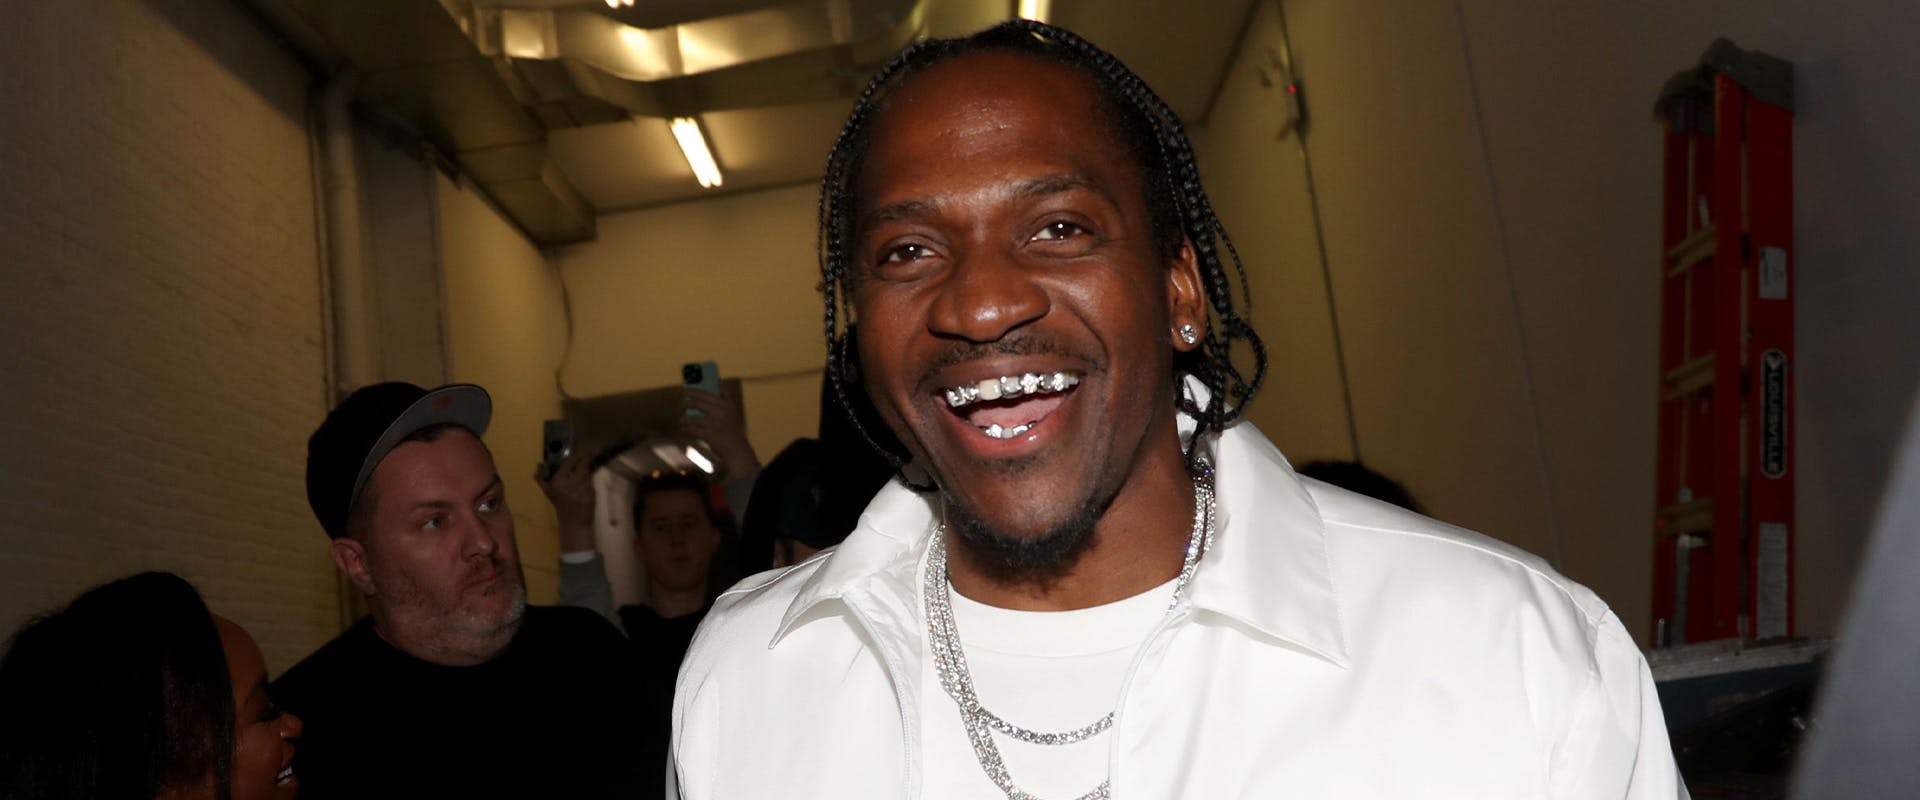 NEW YORK, NEW YORK - APRIL 20: Pusha T attends Pusha T It's Almost Dry Album Listening Event In NYC at Studio 525 on April 20, 2022 in New York City